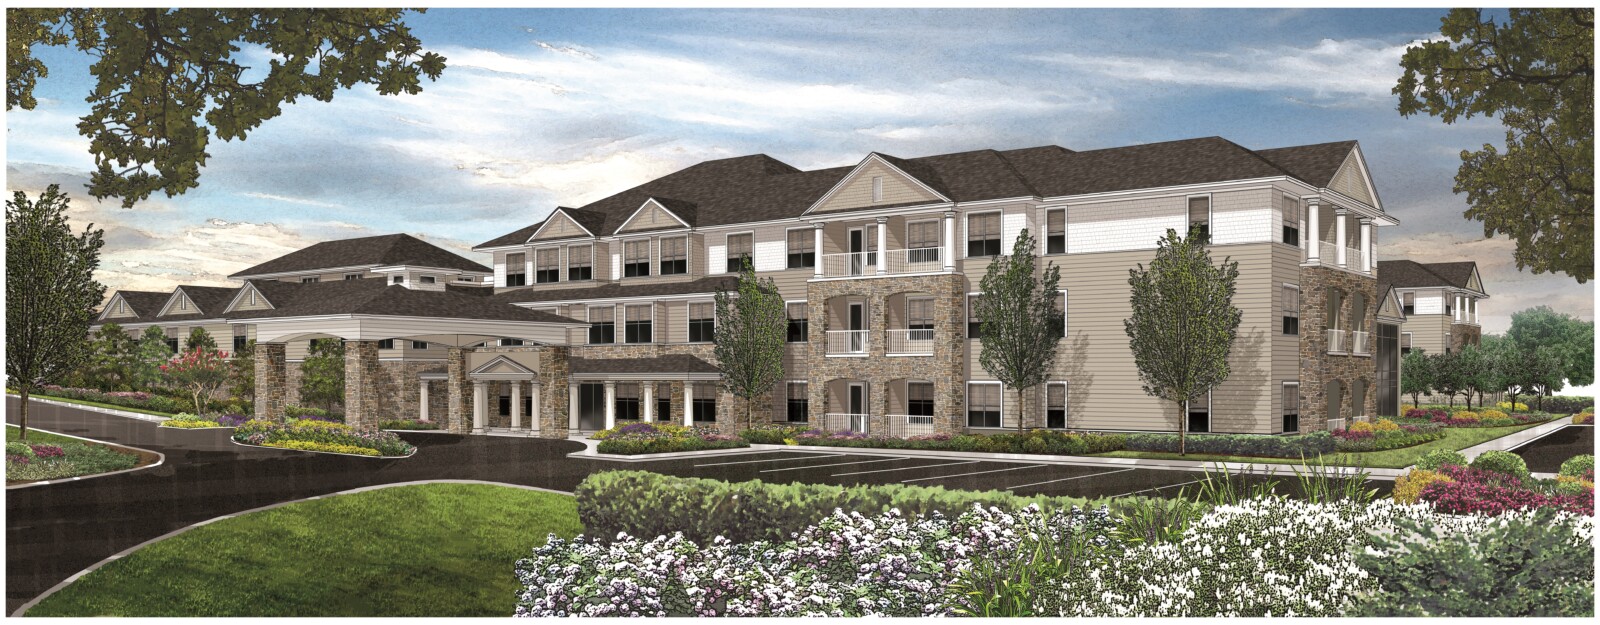 Rendering of new HarborChase assisted living and memory care facility in South Portland